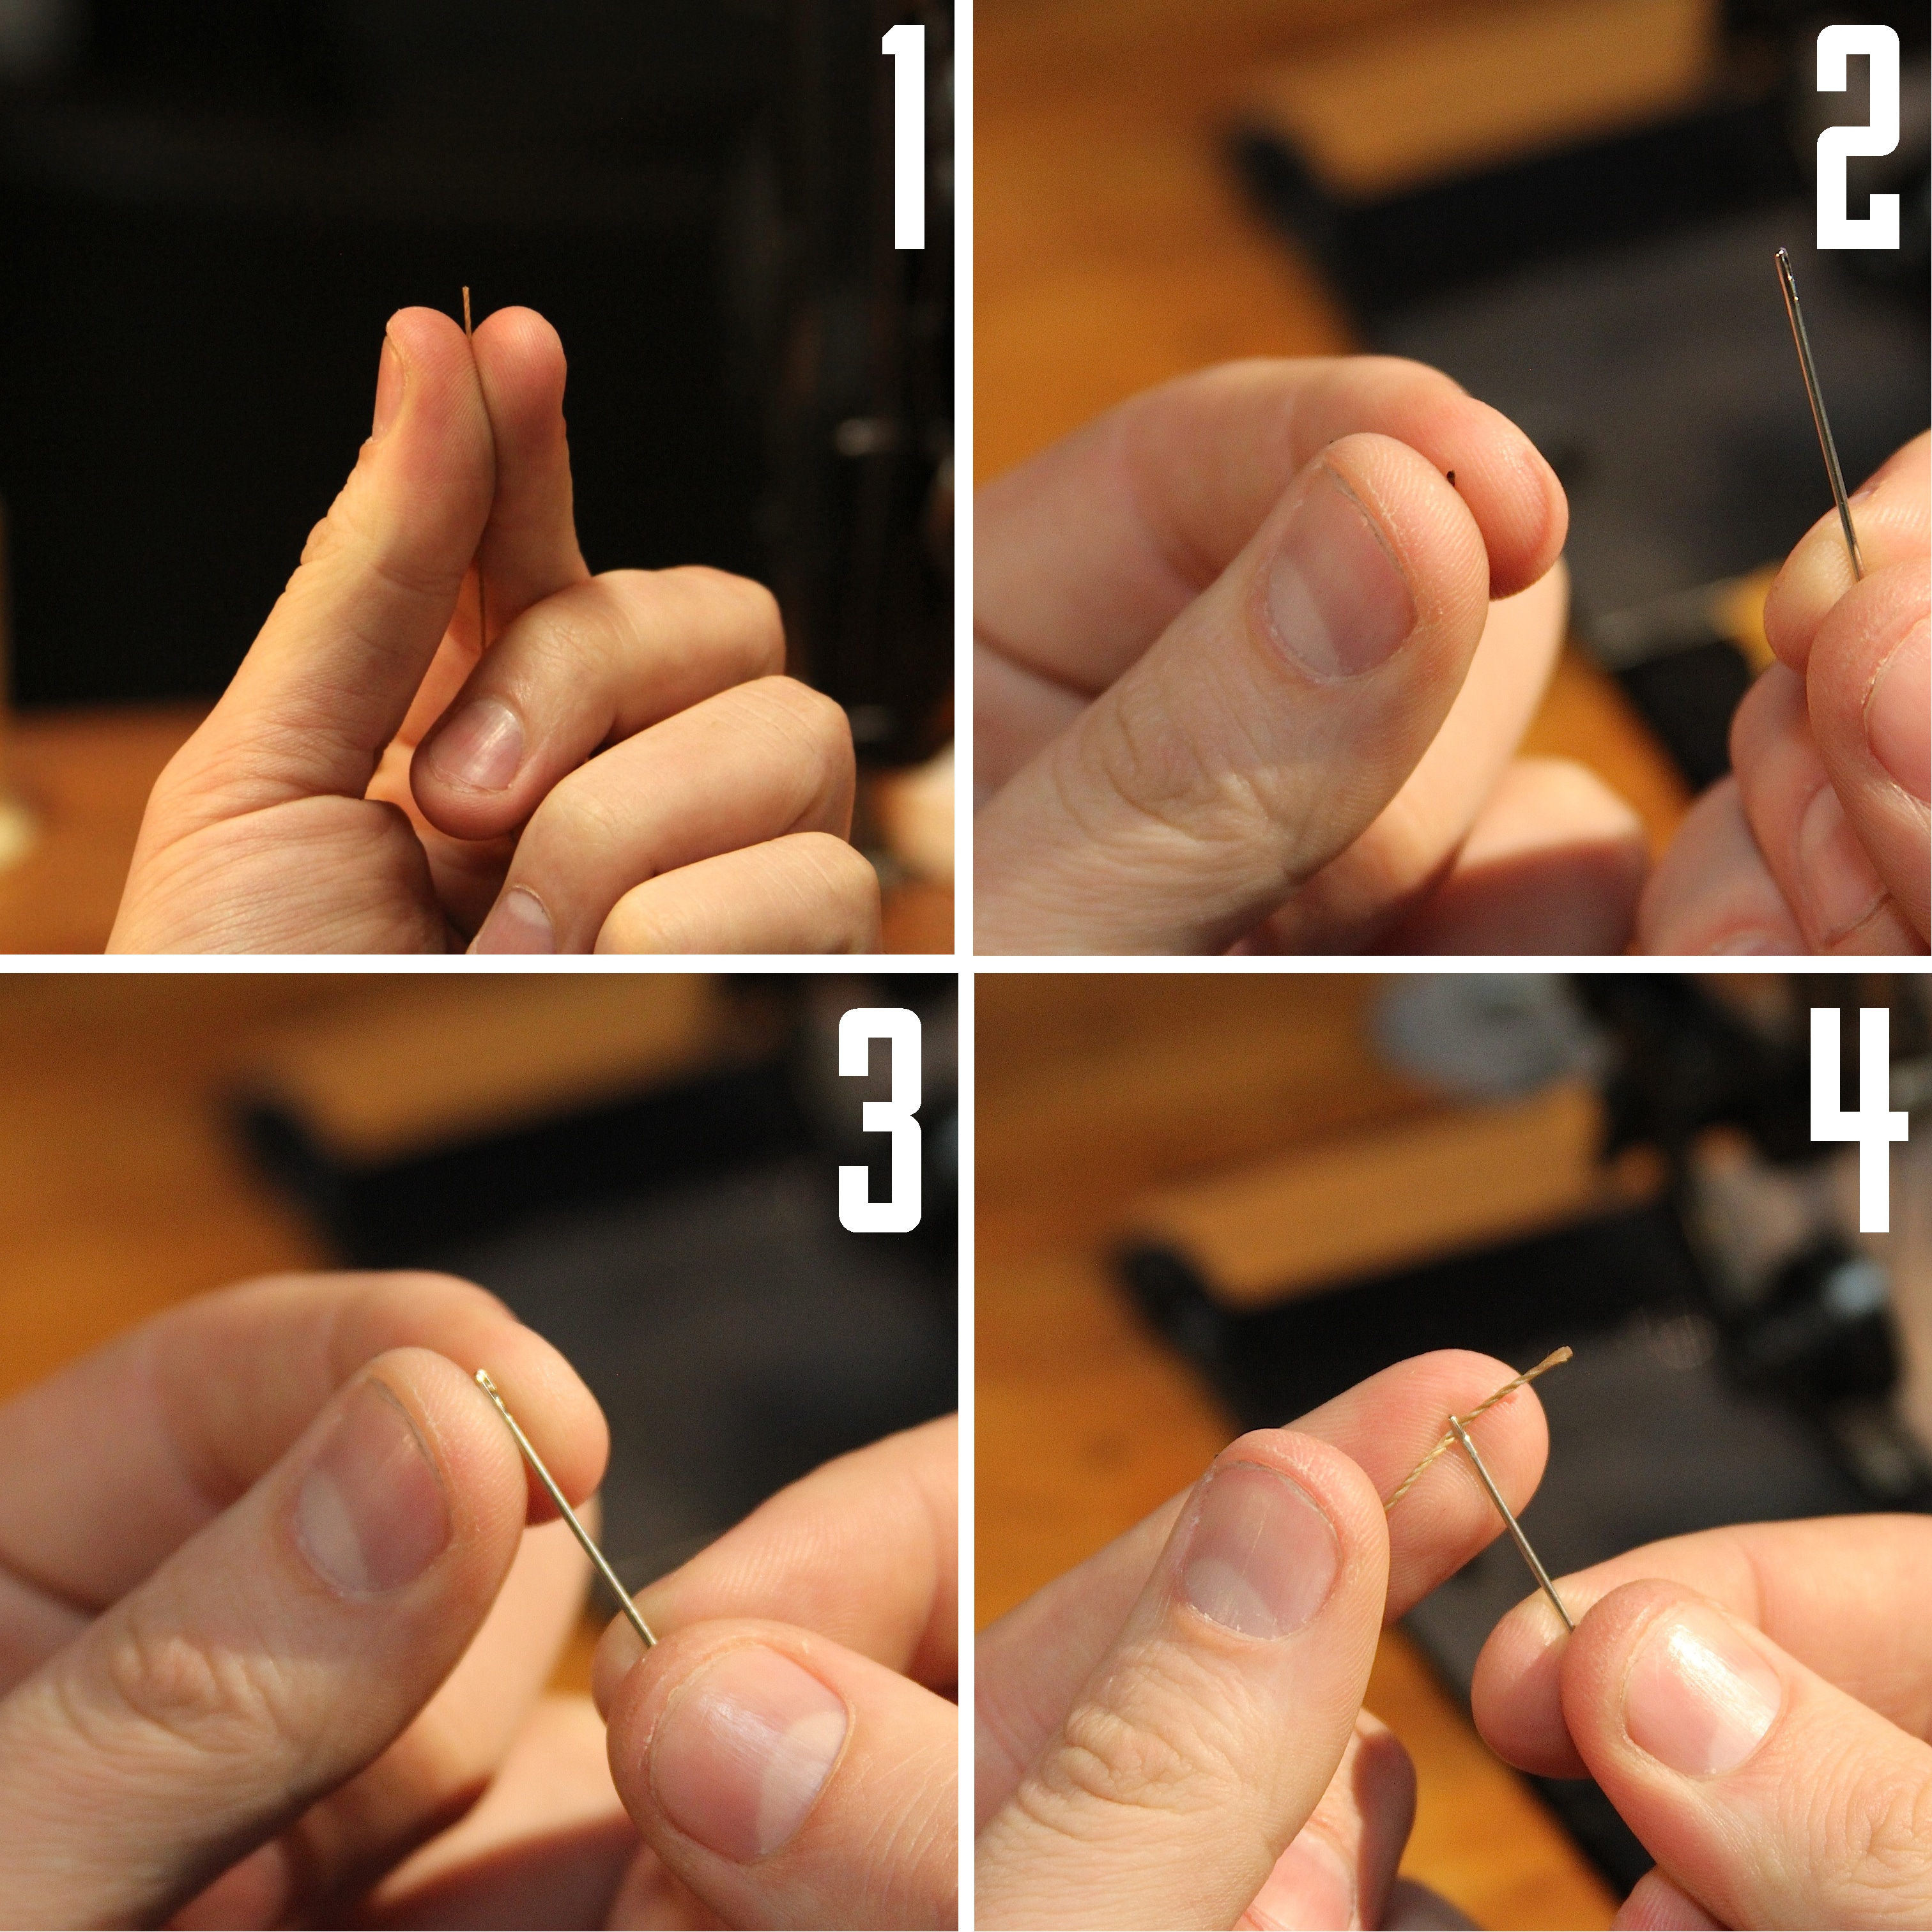 Easiest way to thread needle step by step diagram.